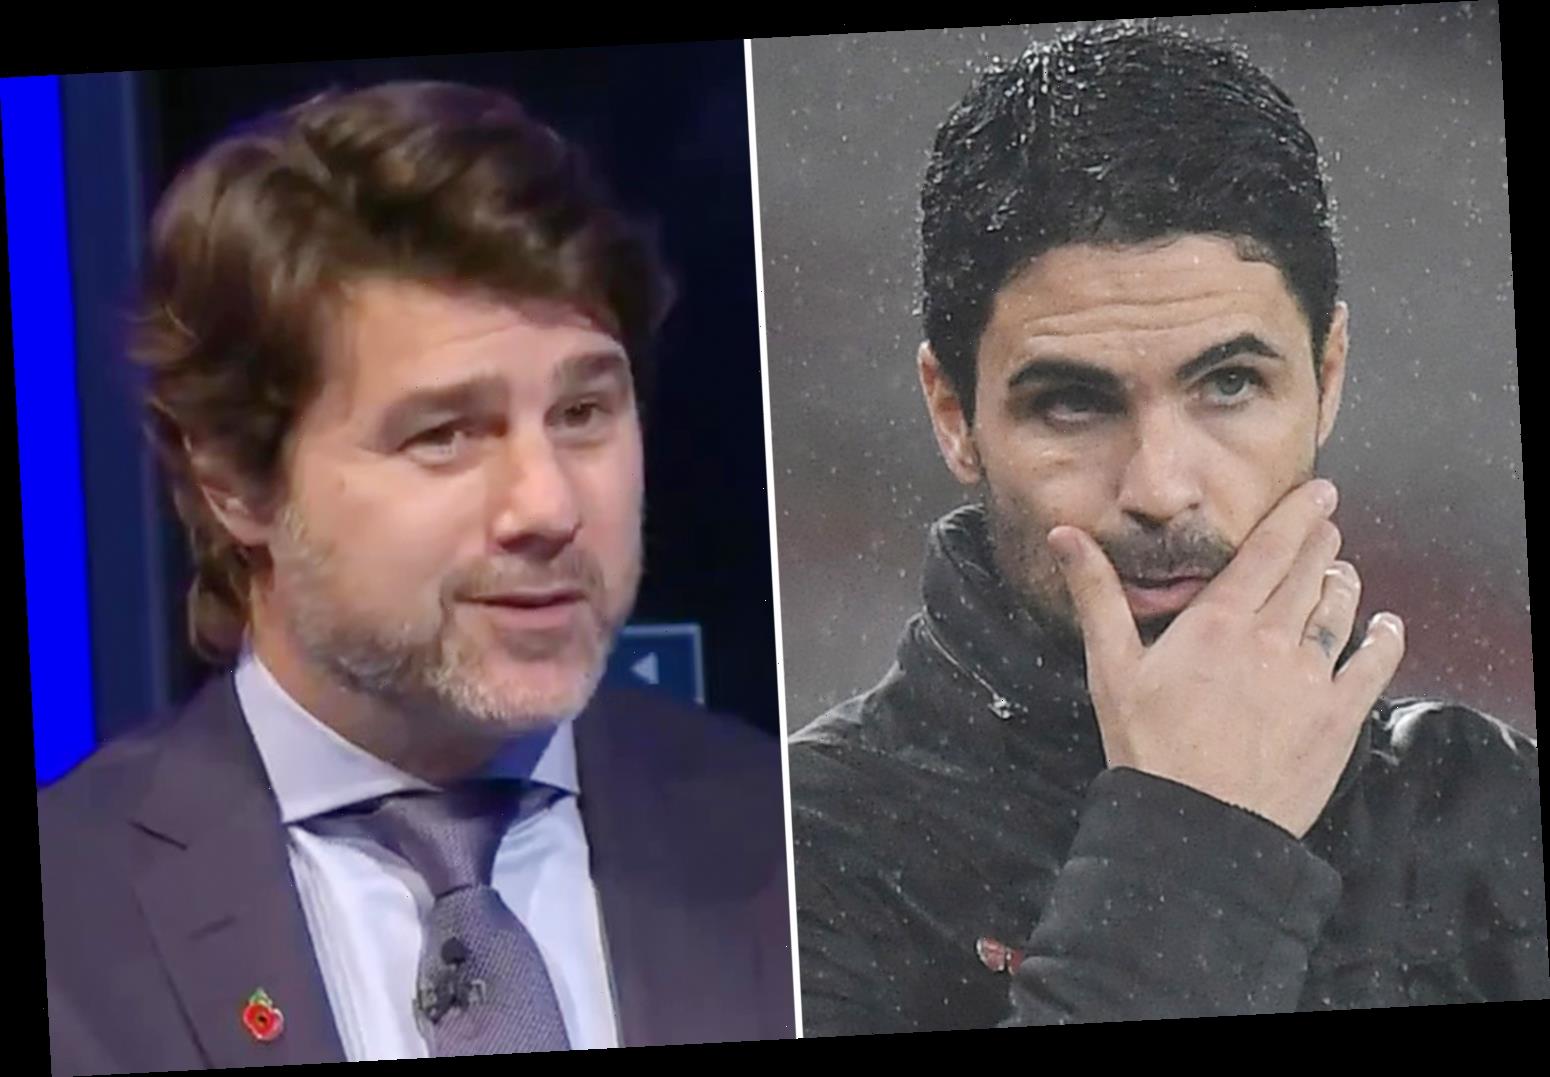 Arsenal fan wants Arteta SACKED and replaced by Pochettino or Allegri